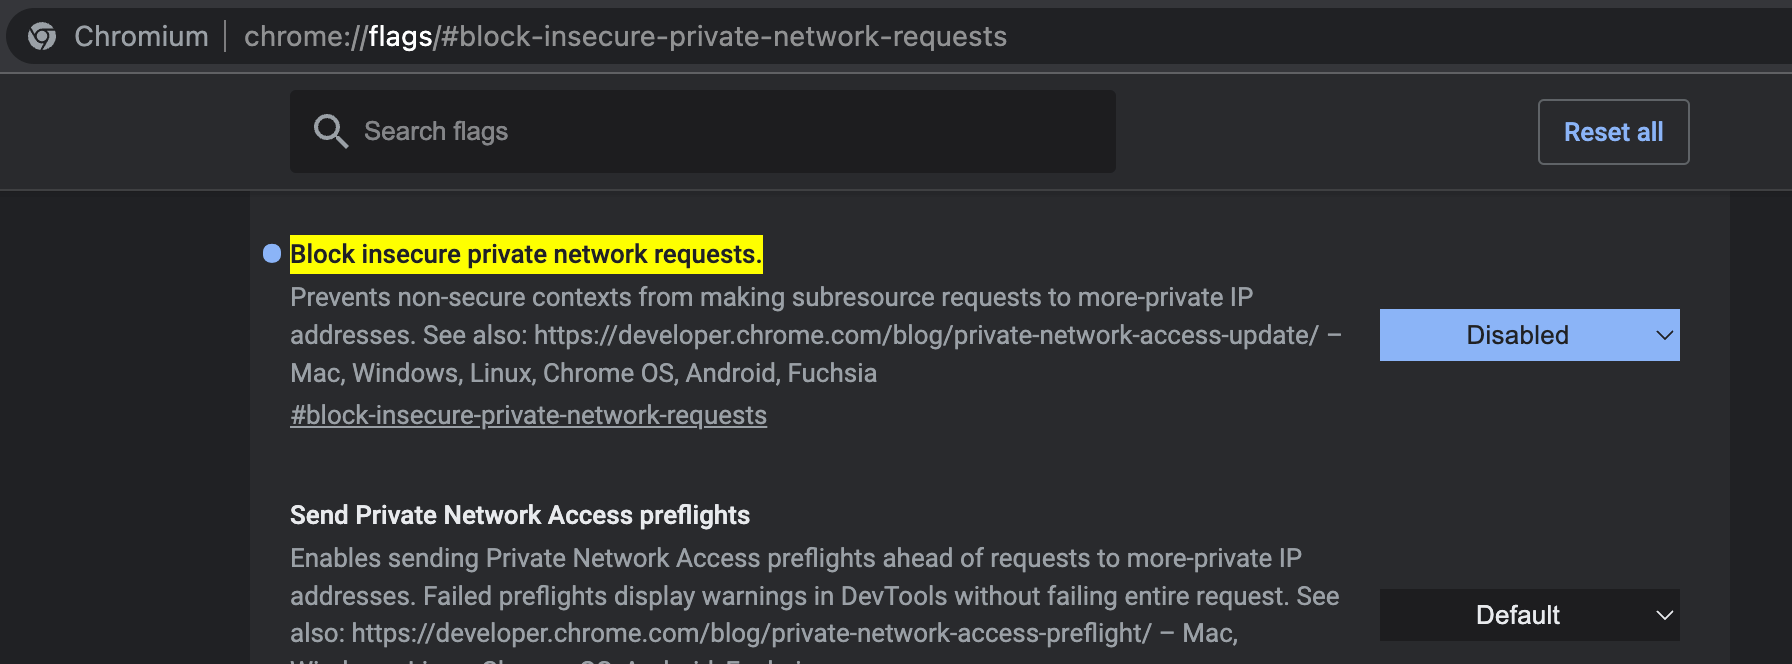 Chrome set block insecure private network requests to disable